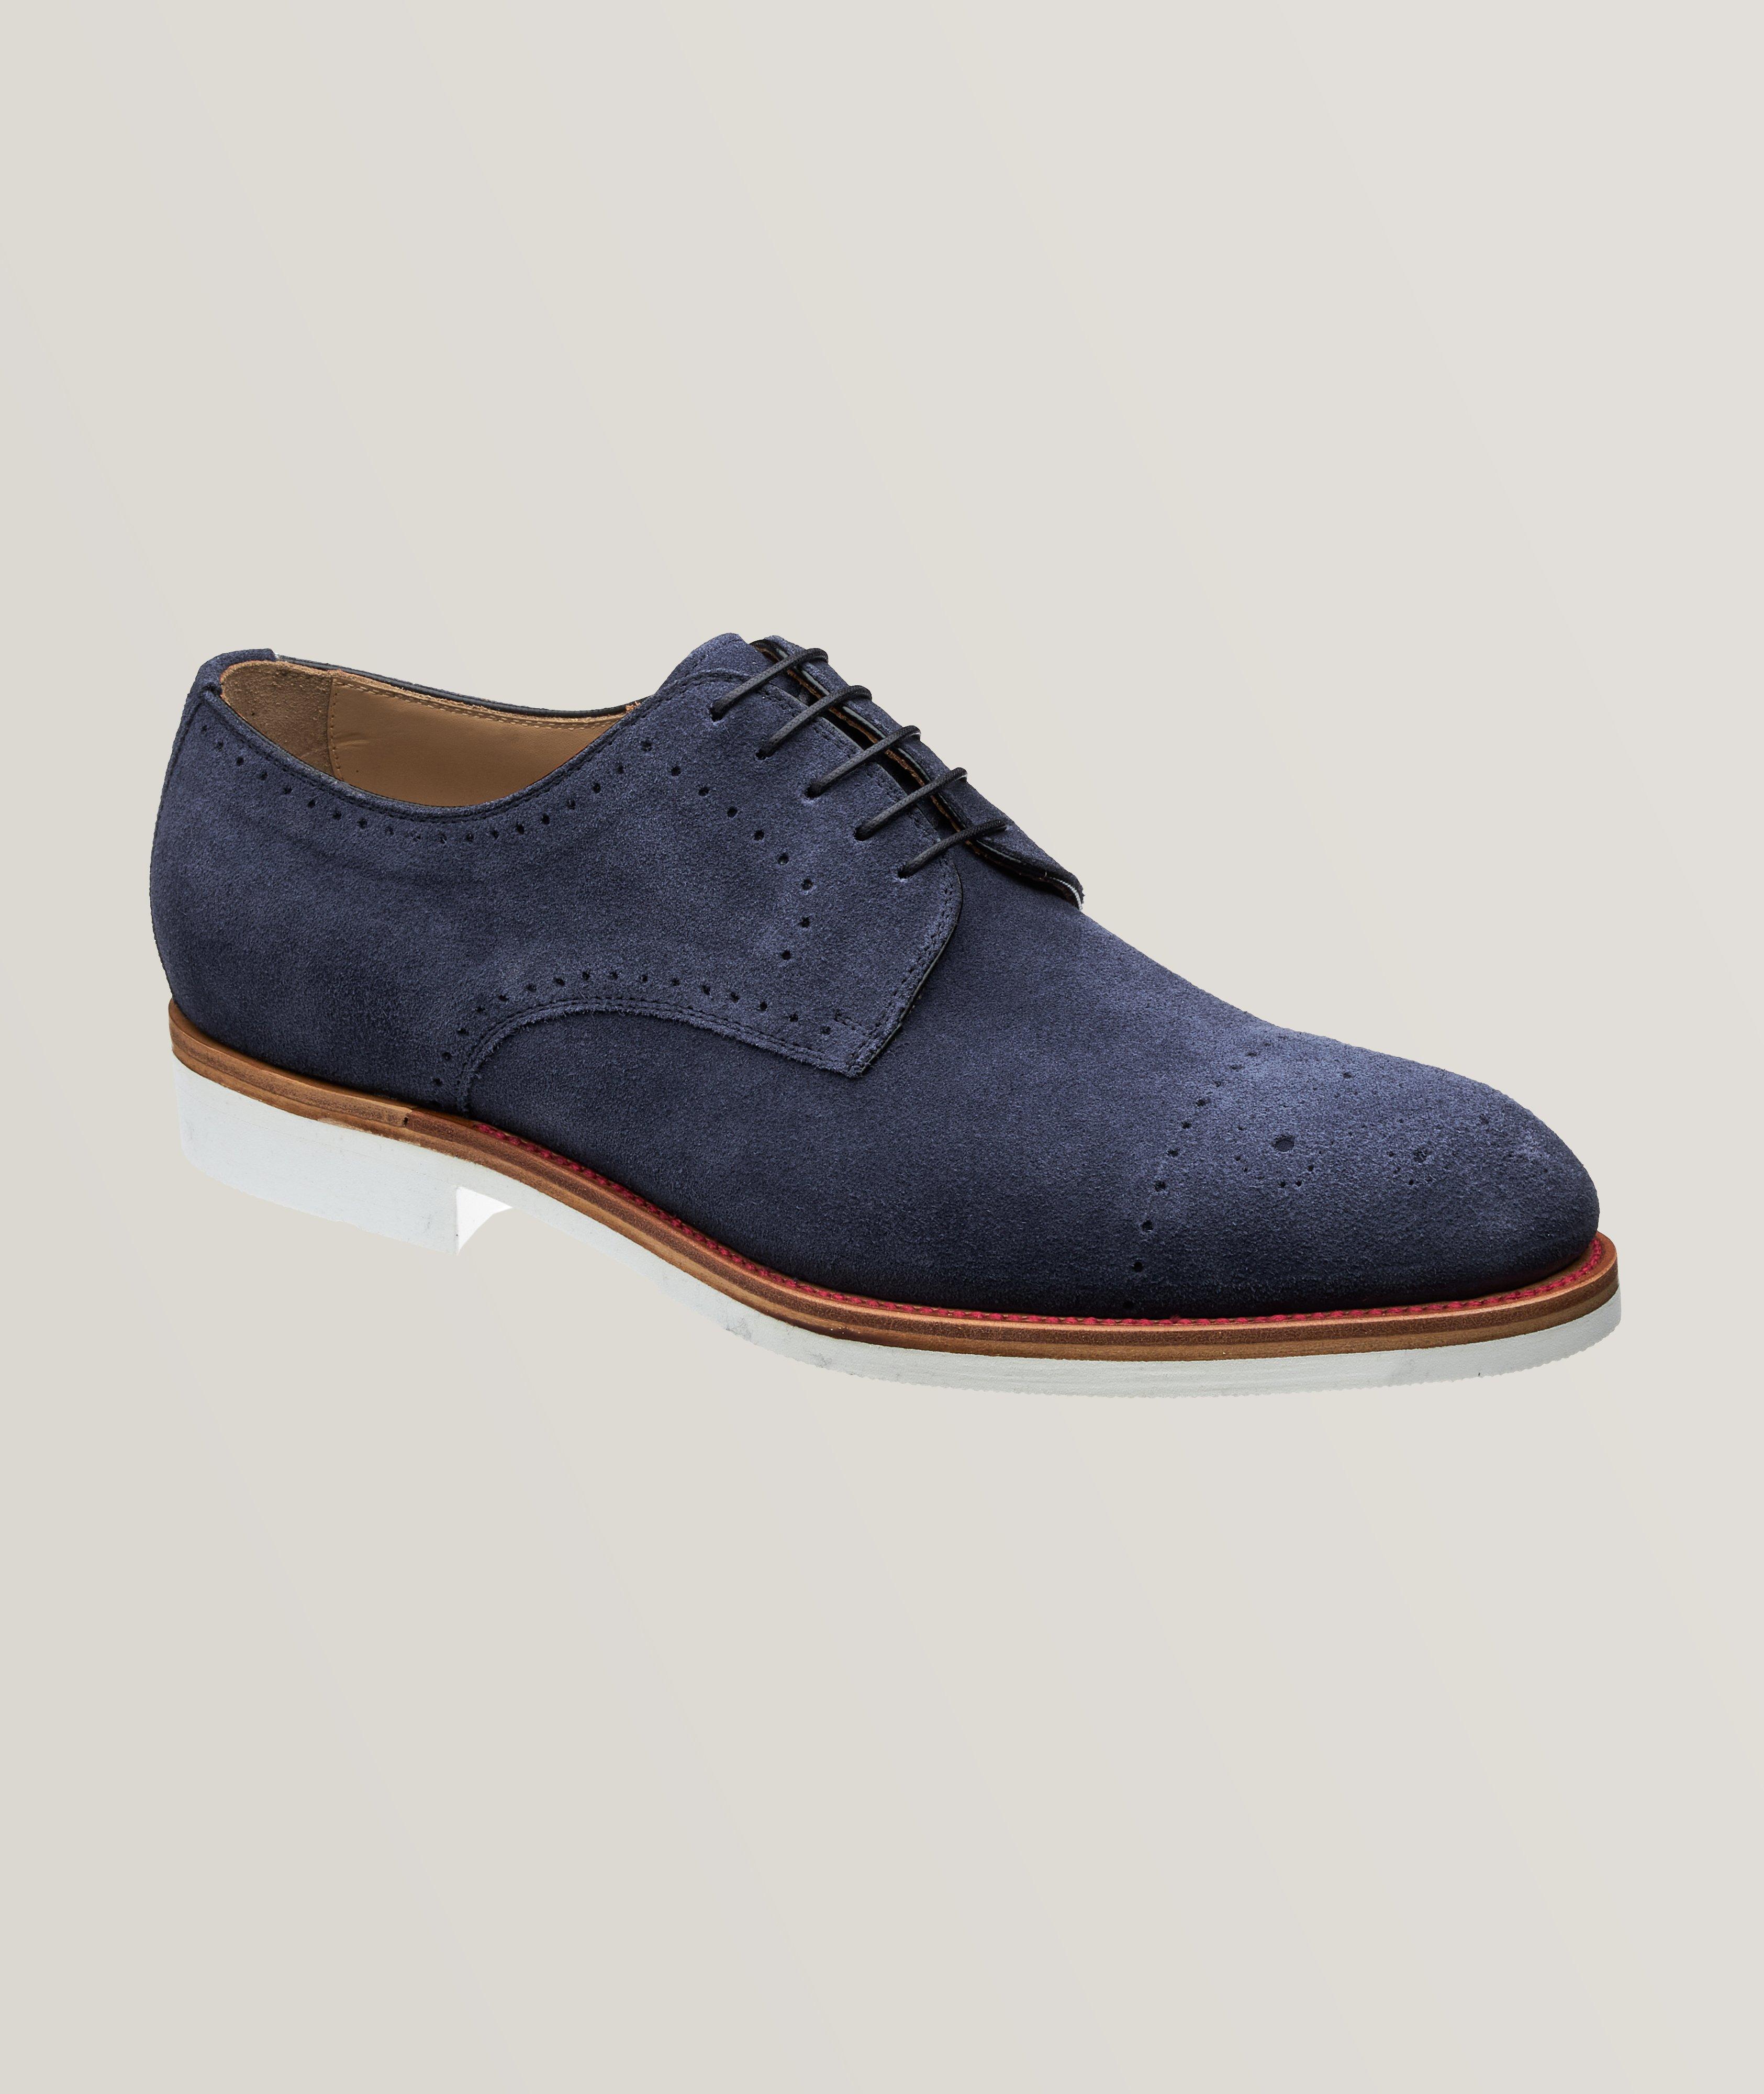 Suede Perforated Lace-Up Derbies image 0